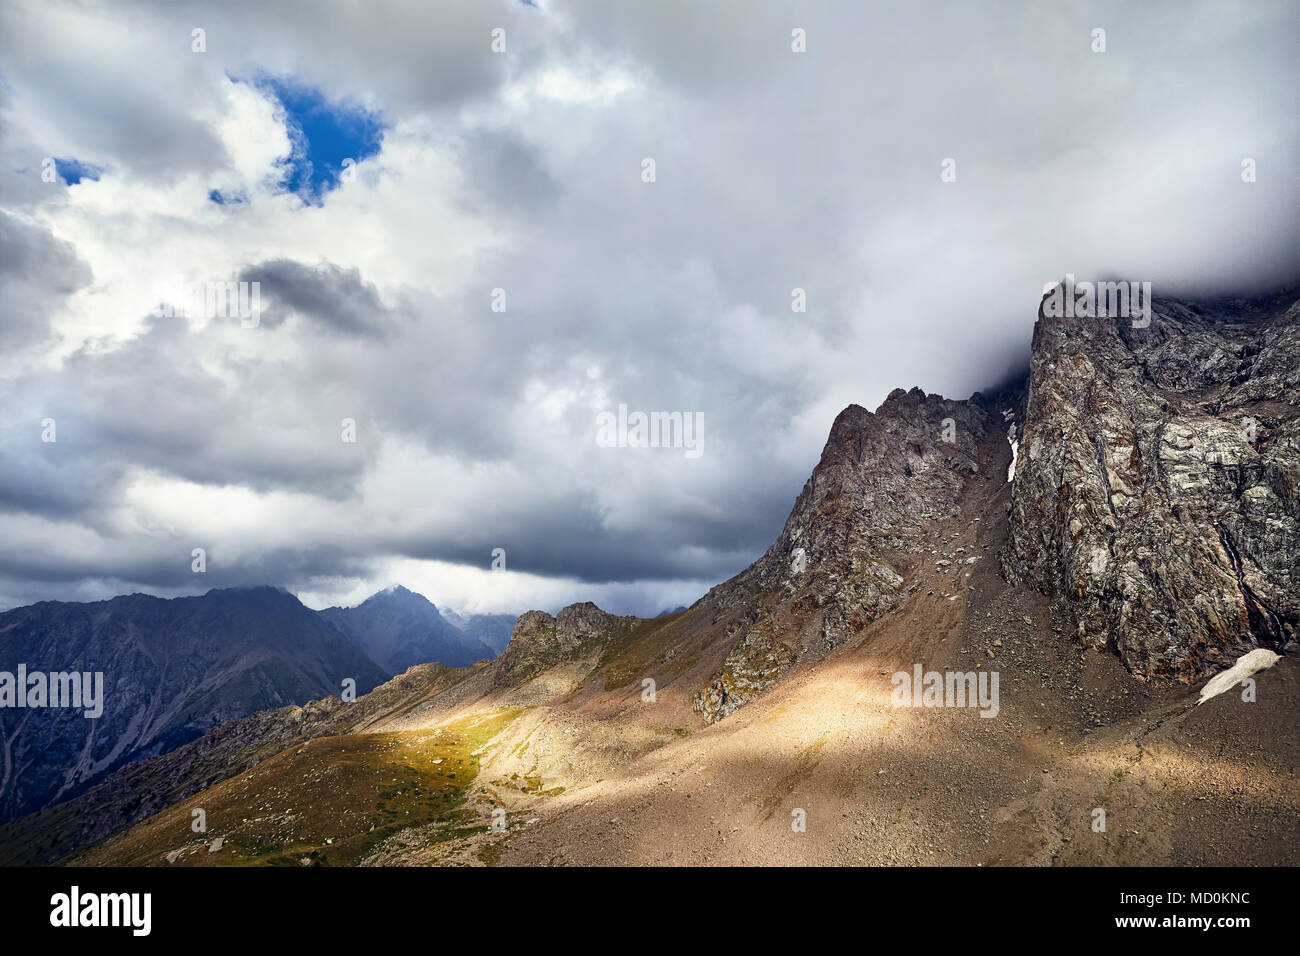 Landscape of Mountain Valley with Rocks at grey overcast cloudy sky background Stock Photo